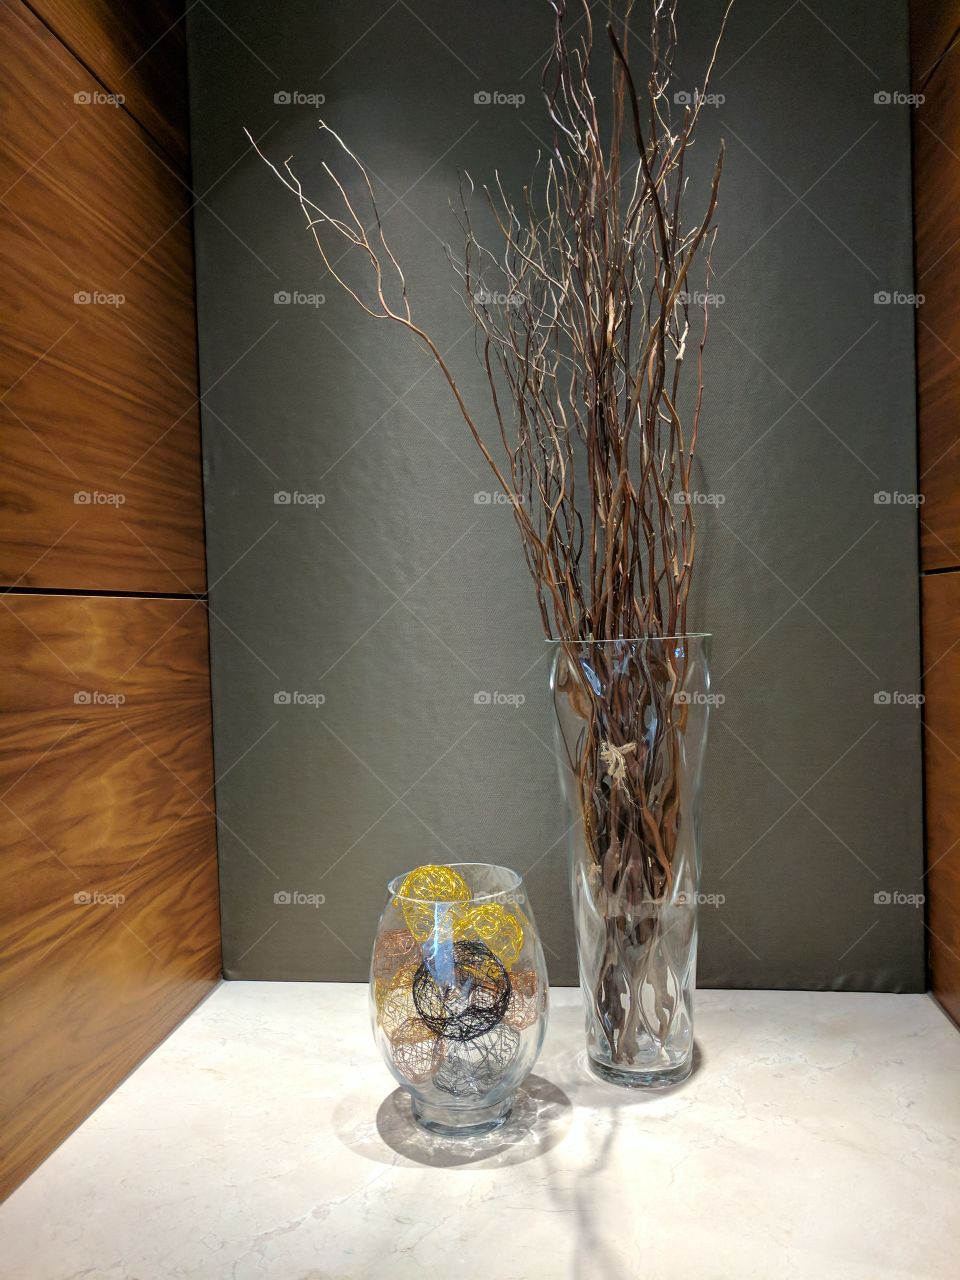 interior design glass vases with decorative bundles of branches and decorative wire balls